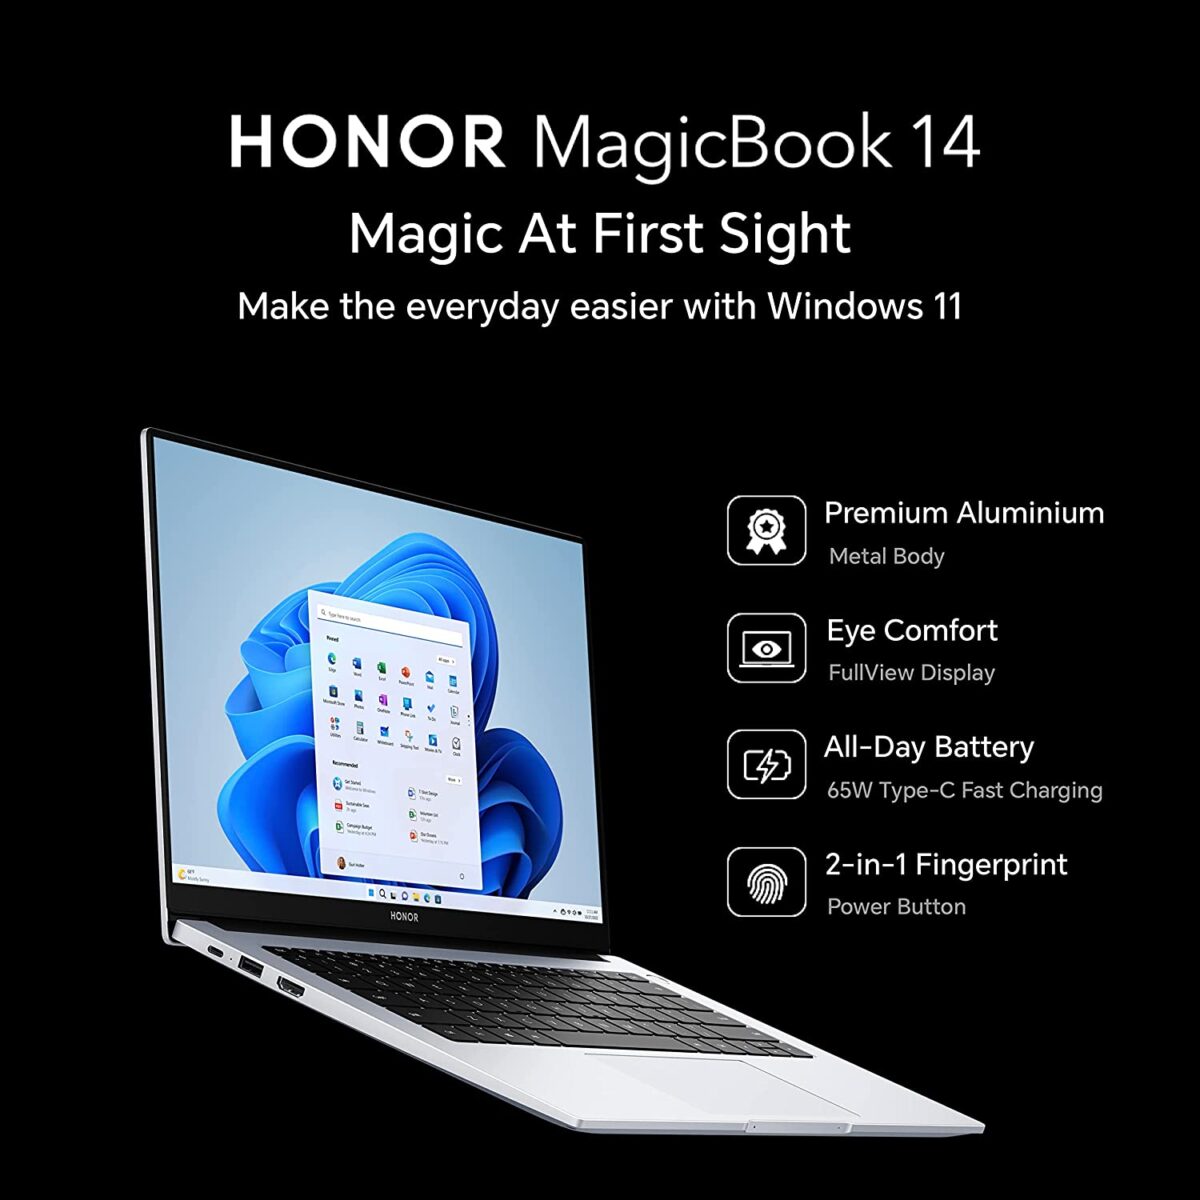 Honor MagicBook 14 ‎‎NobelM-WFQ9AHNE now available in ‎Mystic Silver color [ AMD Ryzen 5 5500U /16GB ram / 512GB SSD ]